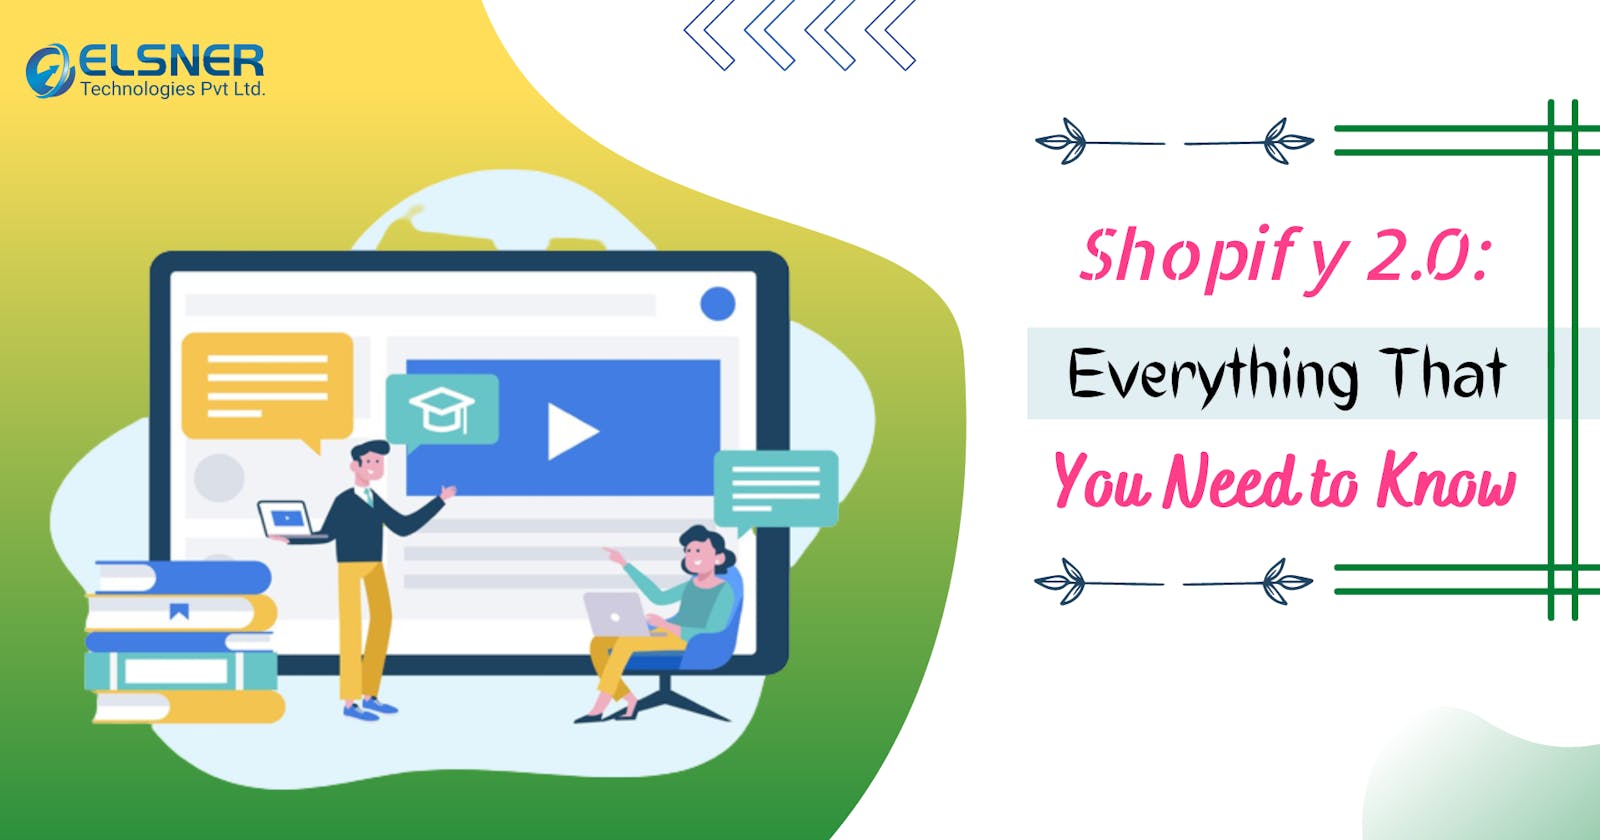 Shopify 2.0: Everything That You Need to Know